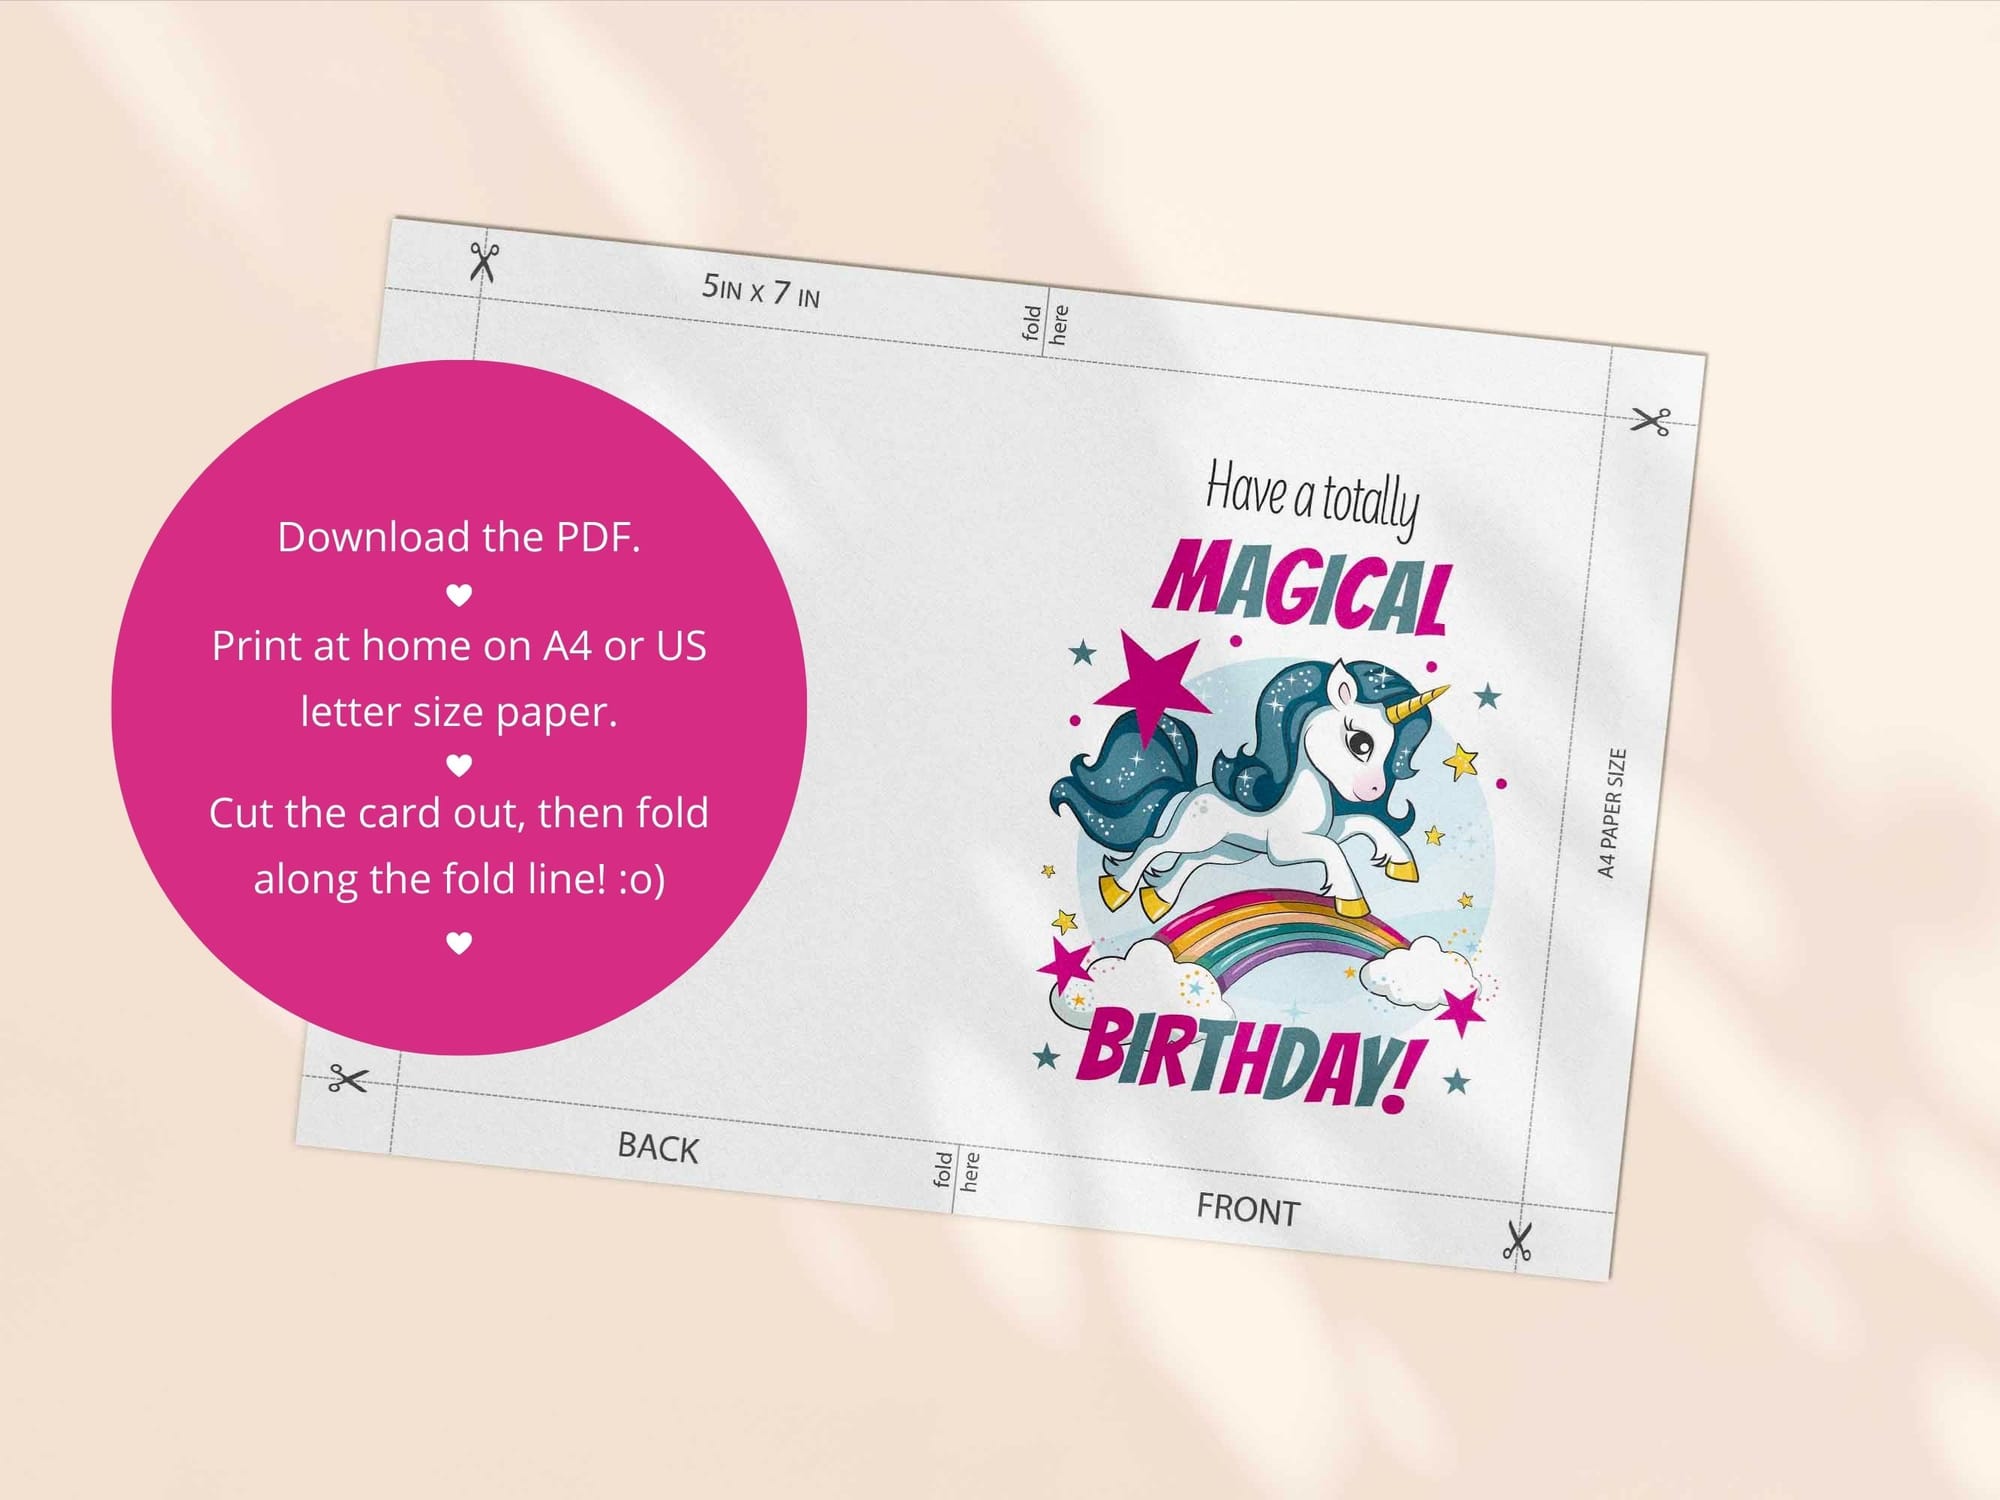 Printable kids birthday card template - both an A4 and US Letter print template are included in this download.